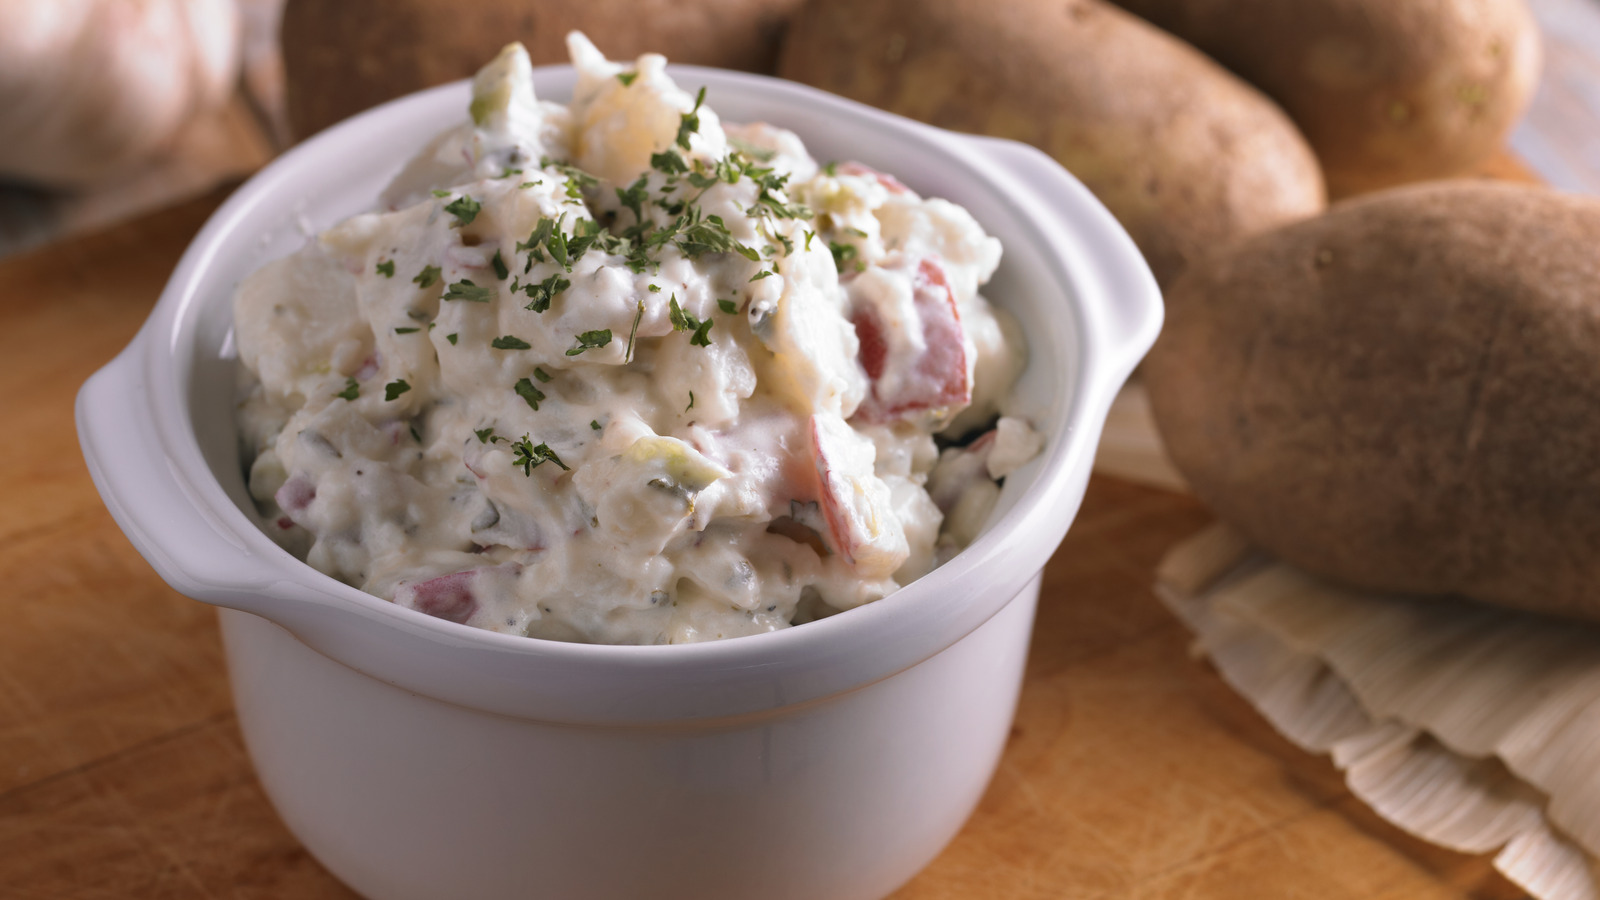 A Simple Swap for Creamy Potato Salad Without Mayonnaise